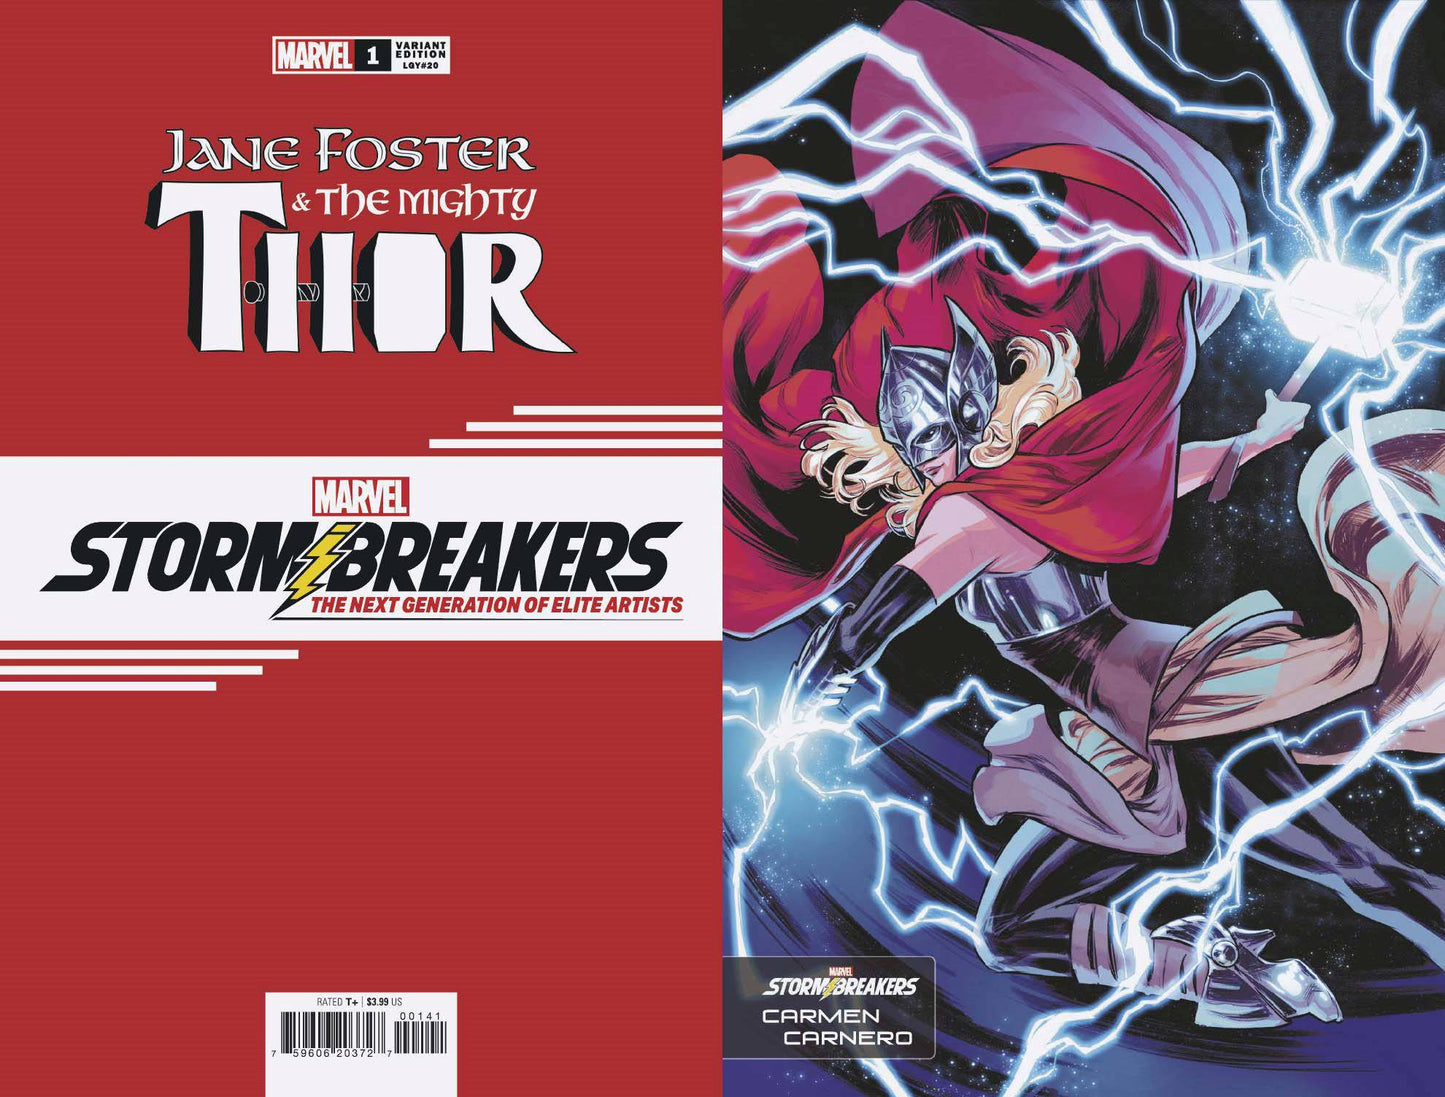 JANE FOSTER MIGHTY THOR #1 (OF 5) CARNERO STORMBRE